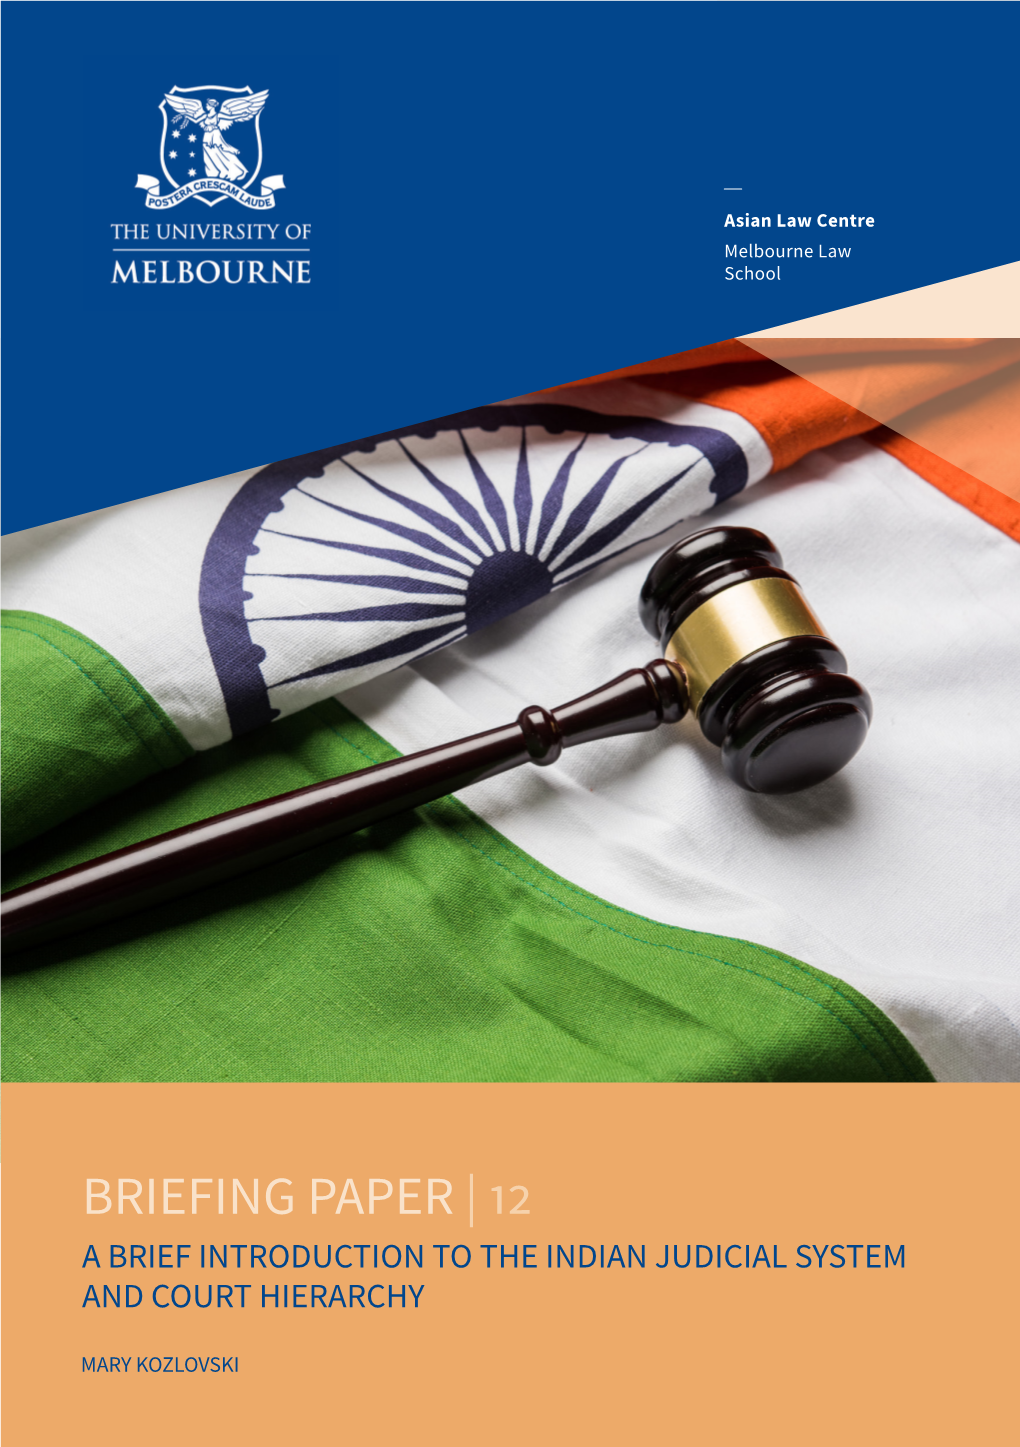 Briefing Paper | 12 a Brief Introduction to the Indian Judicial System and Court Hierarchy